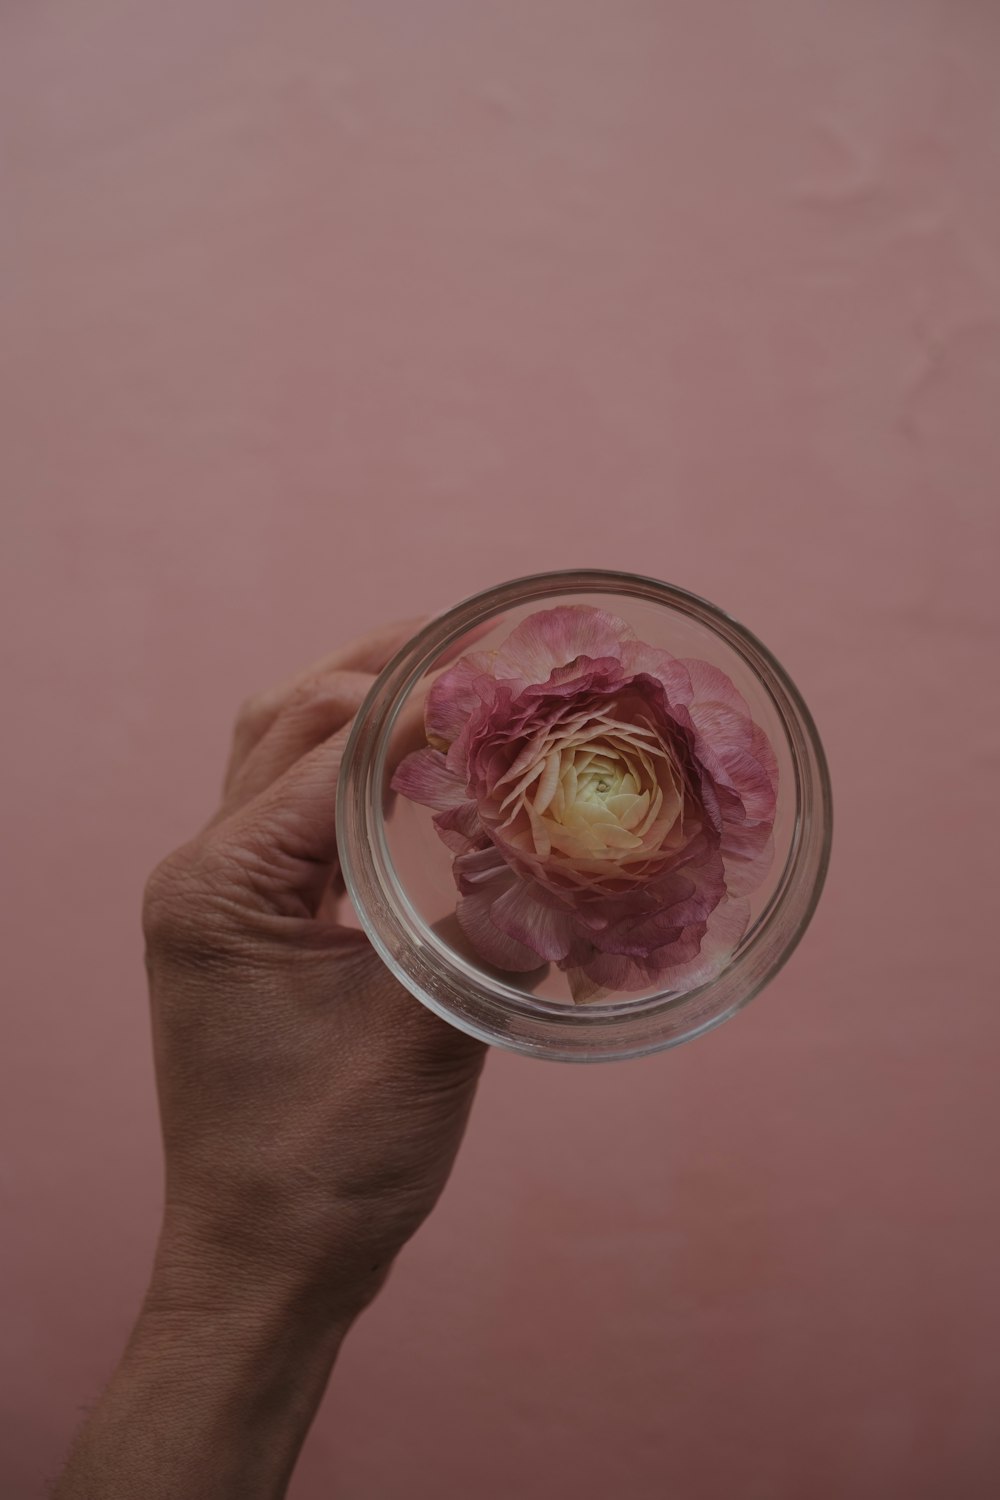 a person holding a glass bowl with a flower in it